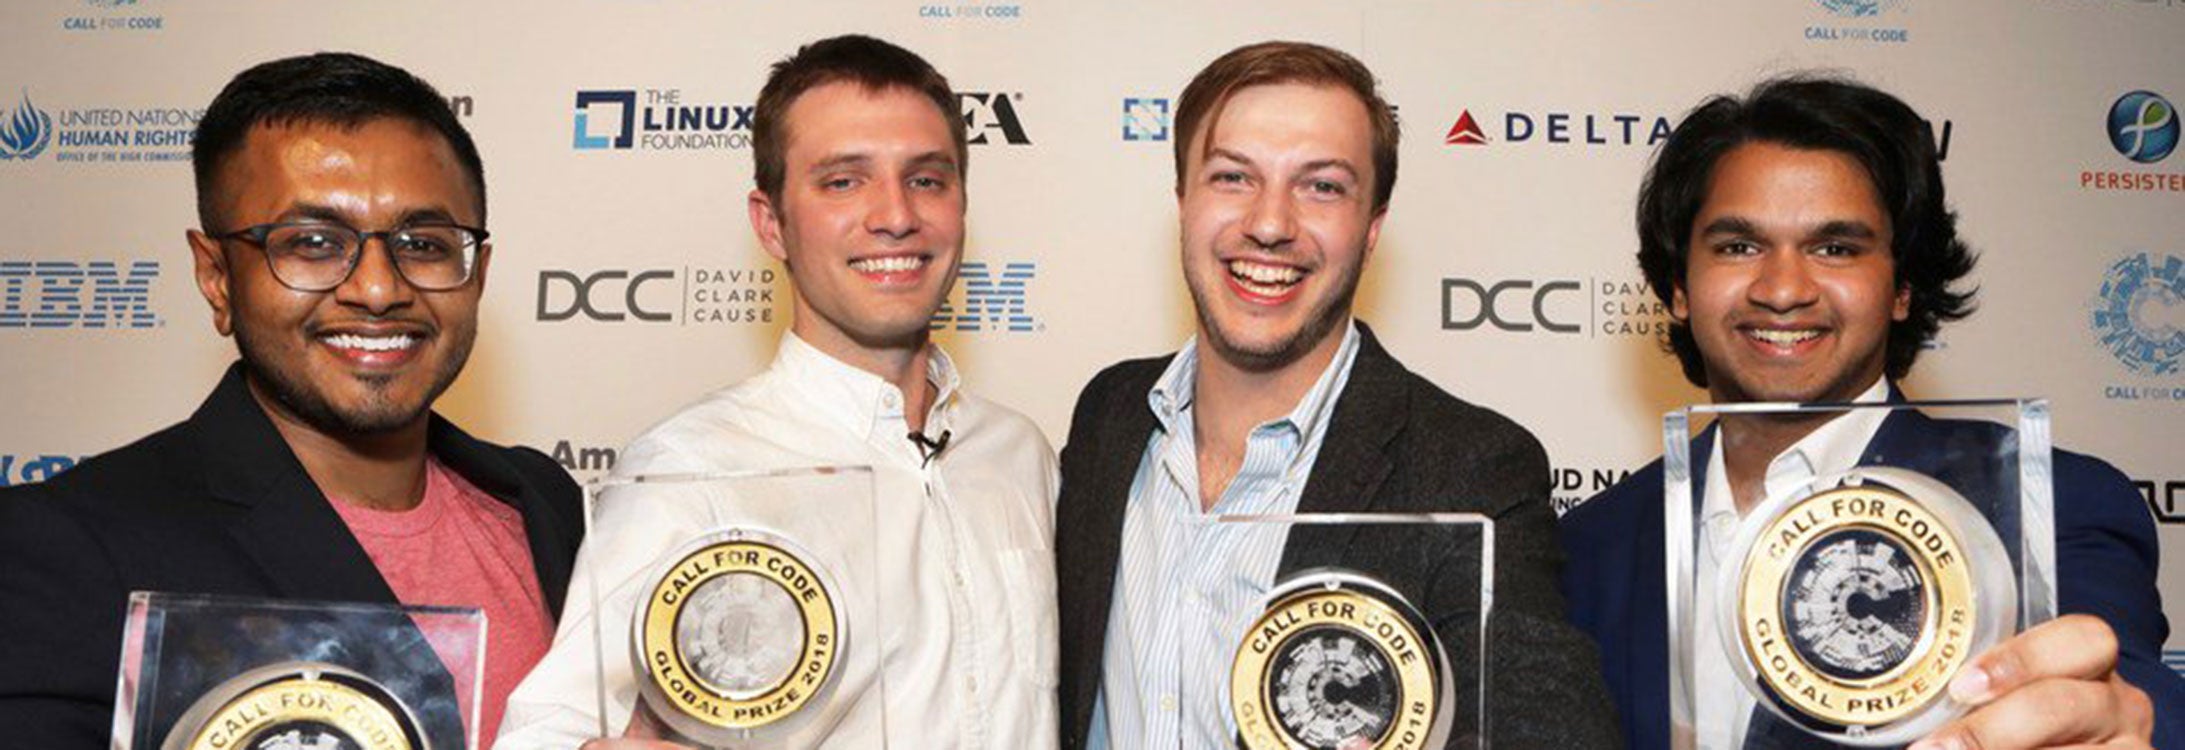 Computer science ’18 alumnus Magus Pereira, far right, was part of a team that won IBM’s first Call for Code Challenge, a competition whose inaugural theme focused on natural disaster preparedness and relief. The winning team also included, pictured left to right, Taraqur Rahman, Bryan Knouse and Nick Feuer. (Photo by Call for Code)